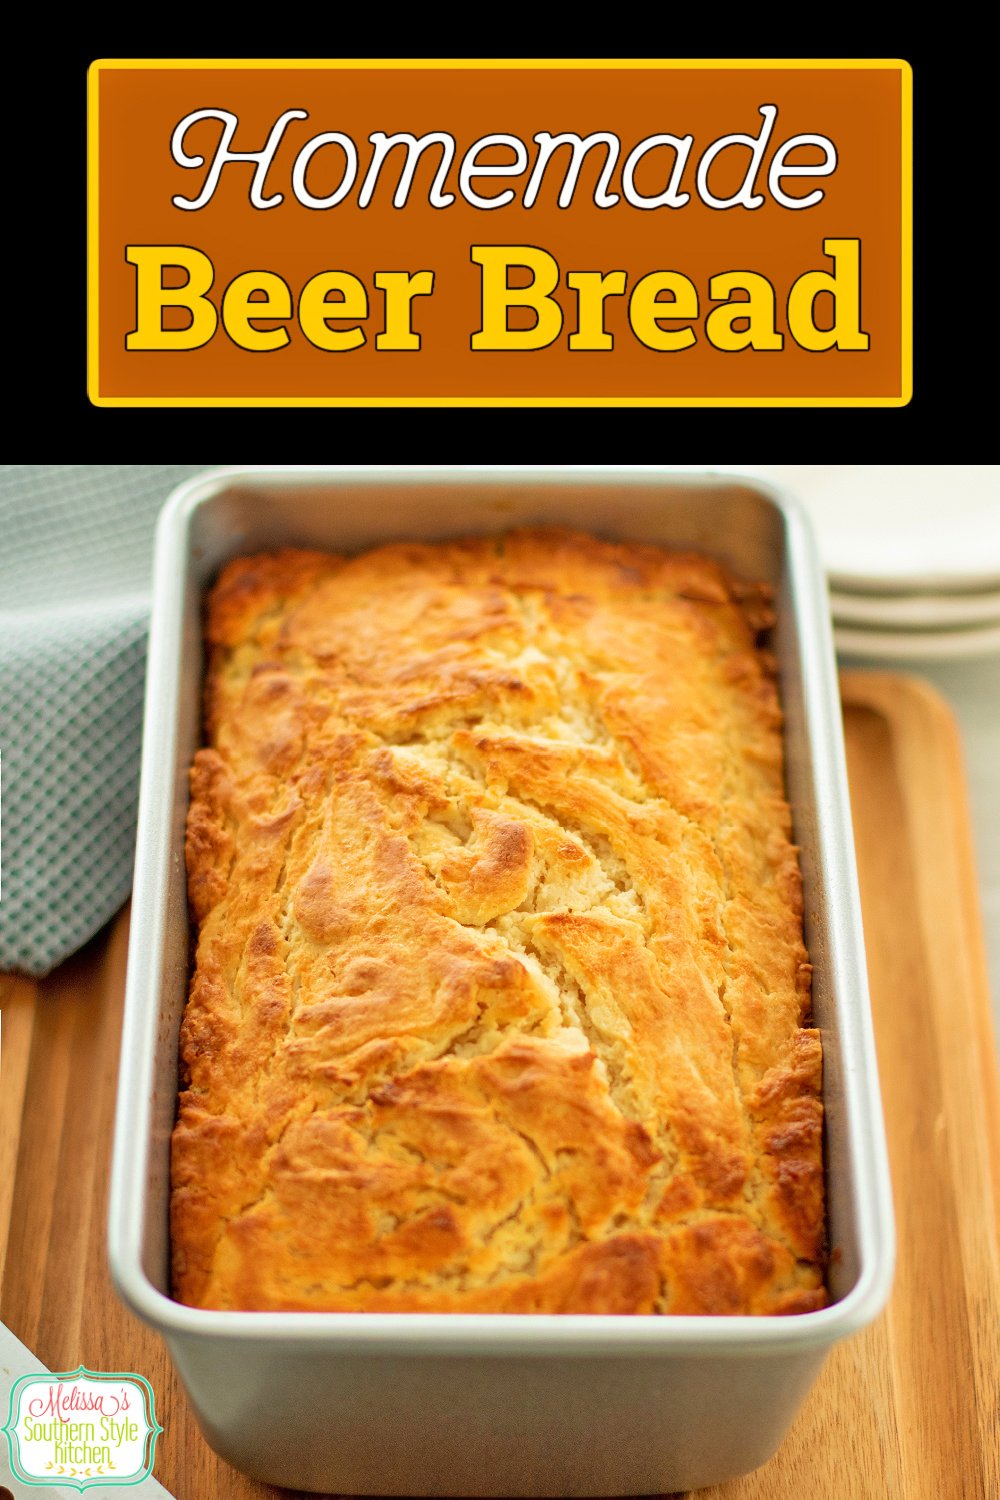 This homemade Beer Bread Recipe only requires 4 ingredients to make! #beerbread #easybreadrecipes #breadrecipes #baking #beerrecipes #bread #easybeerbread